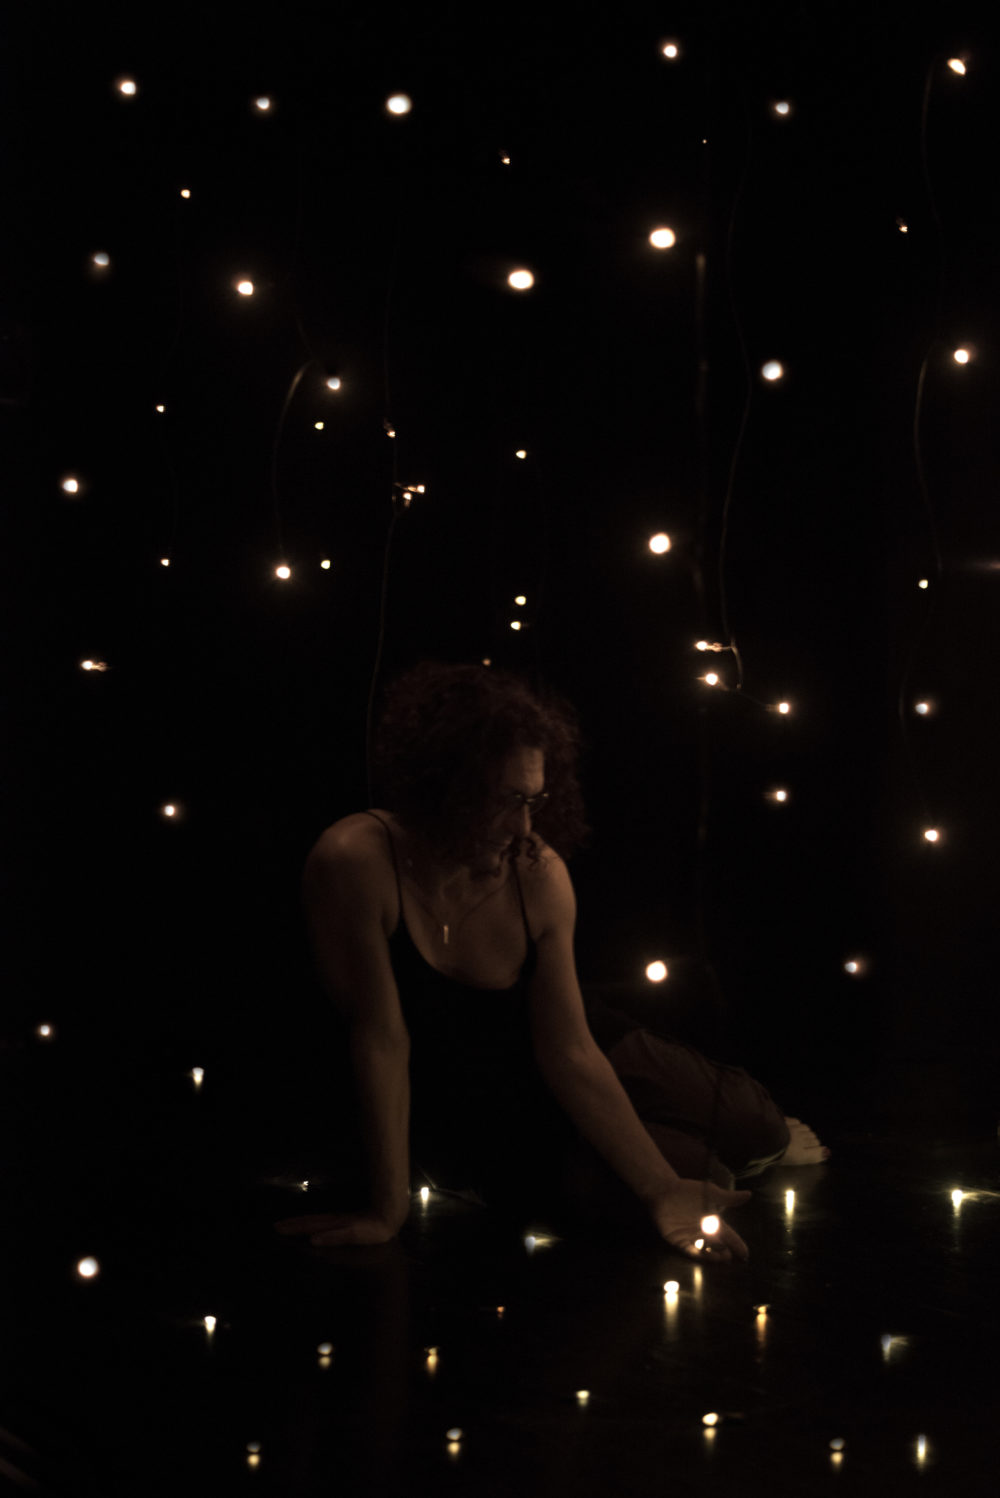 A woman sits in dark room surrounded by tiny lights. She holds one of the lights in an open hand.